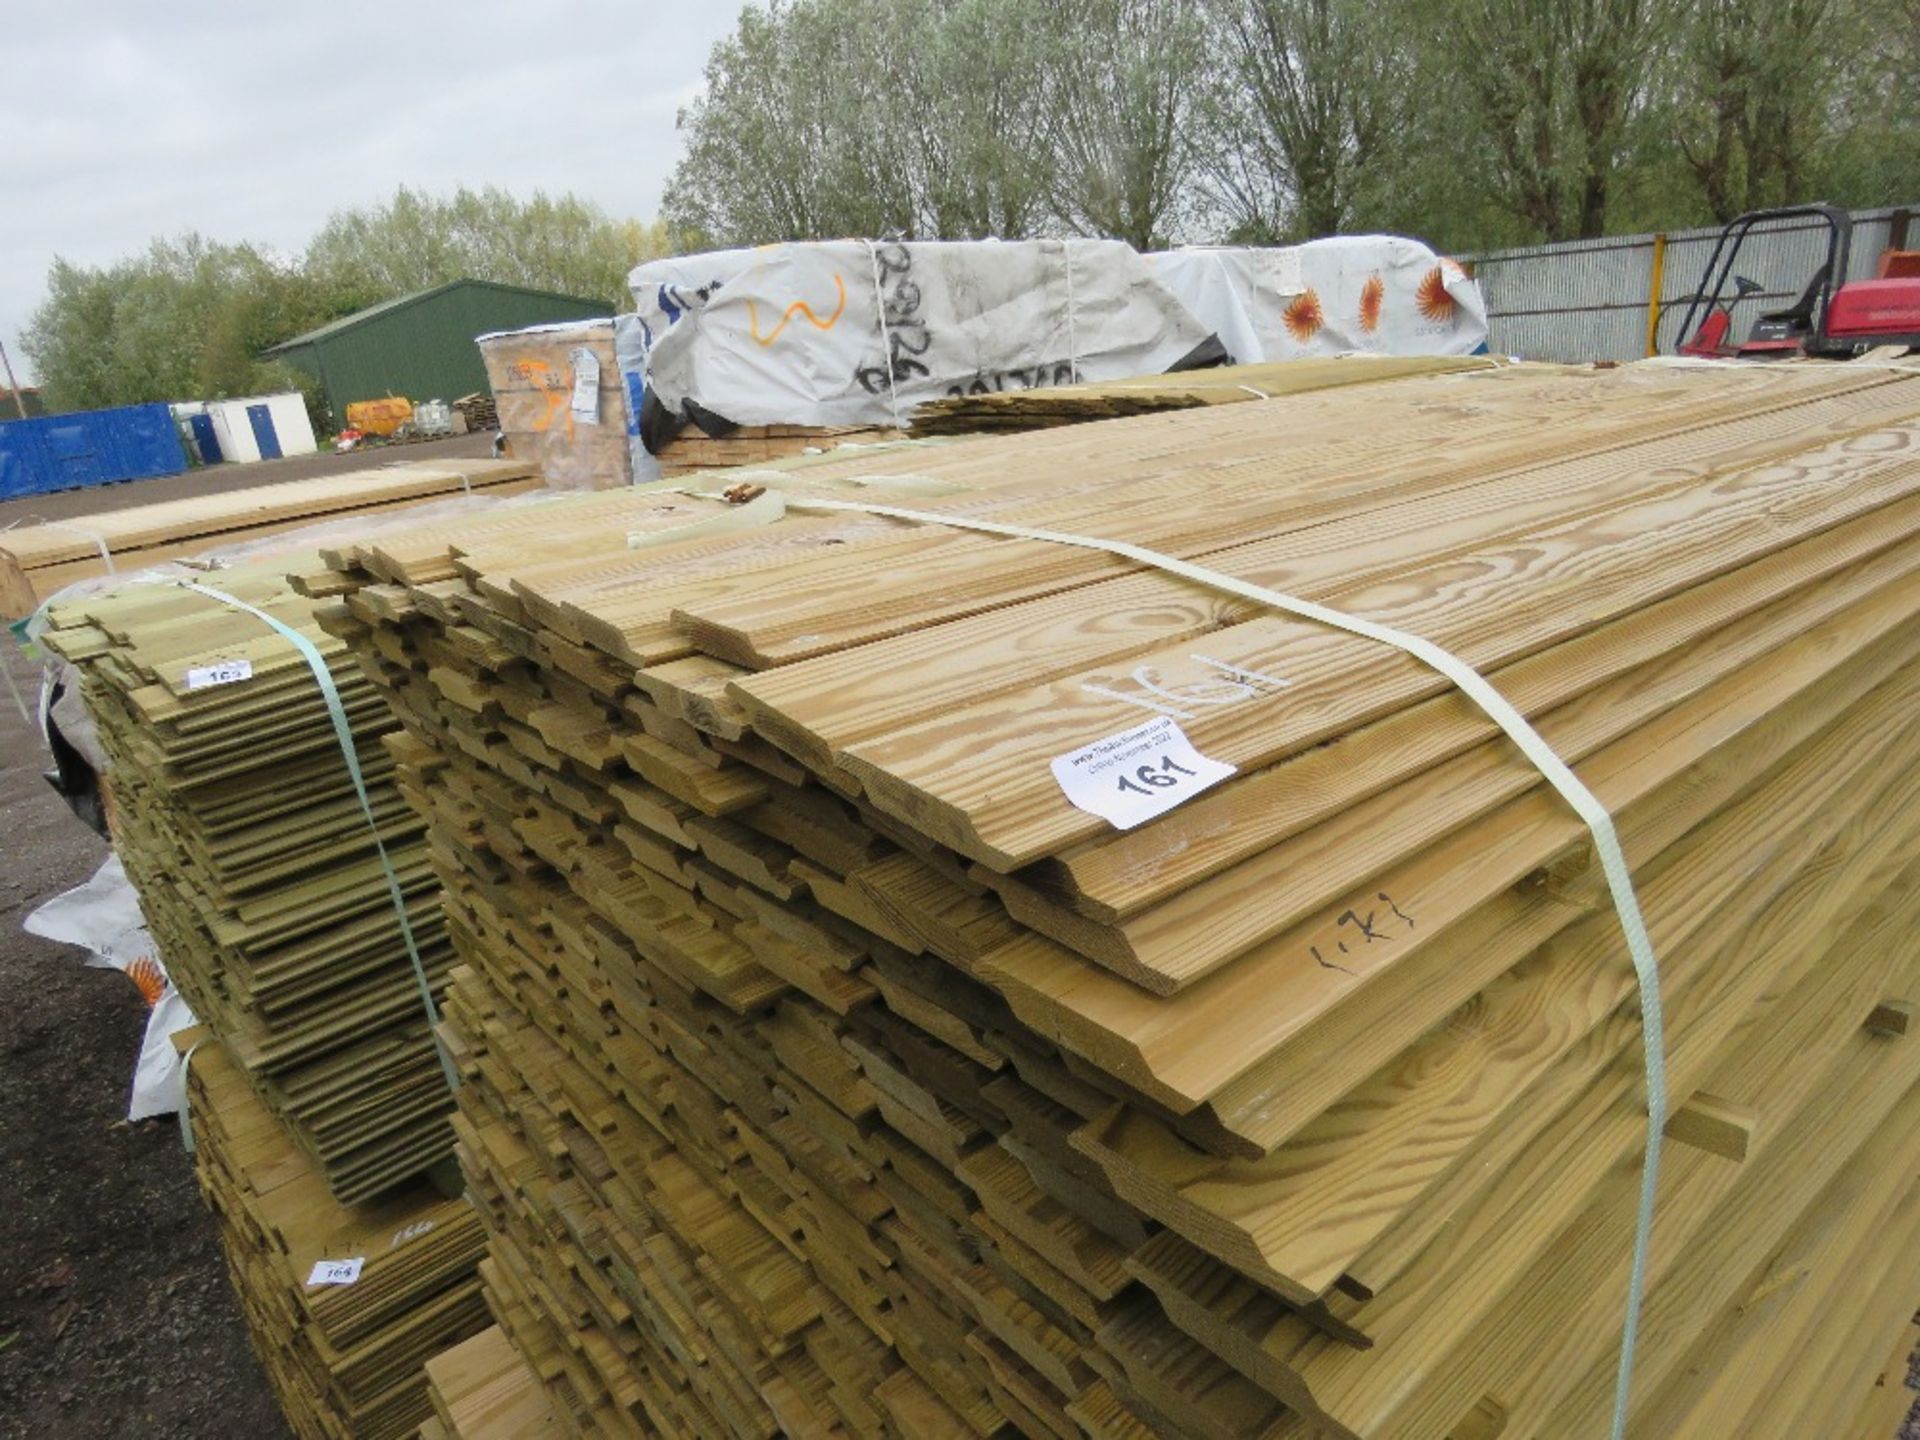 LARGE PACK OF TREATED SHIPLAP TIMBER CLADDING BOARDS. 1.73M LENGTH X 95MM WIDTH APPROX. - Image 2 of 3